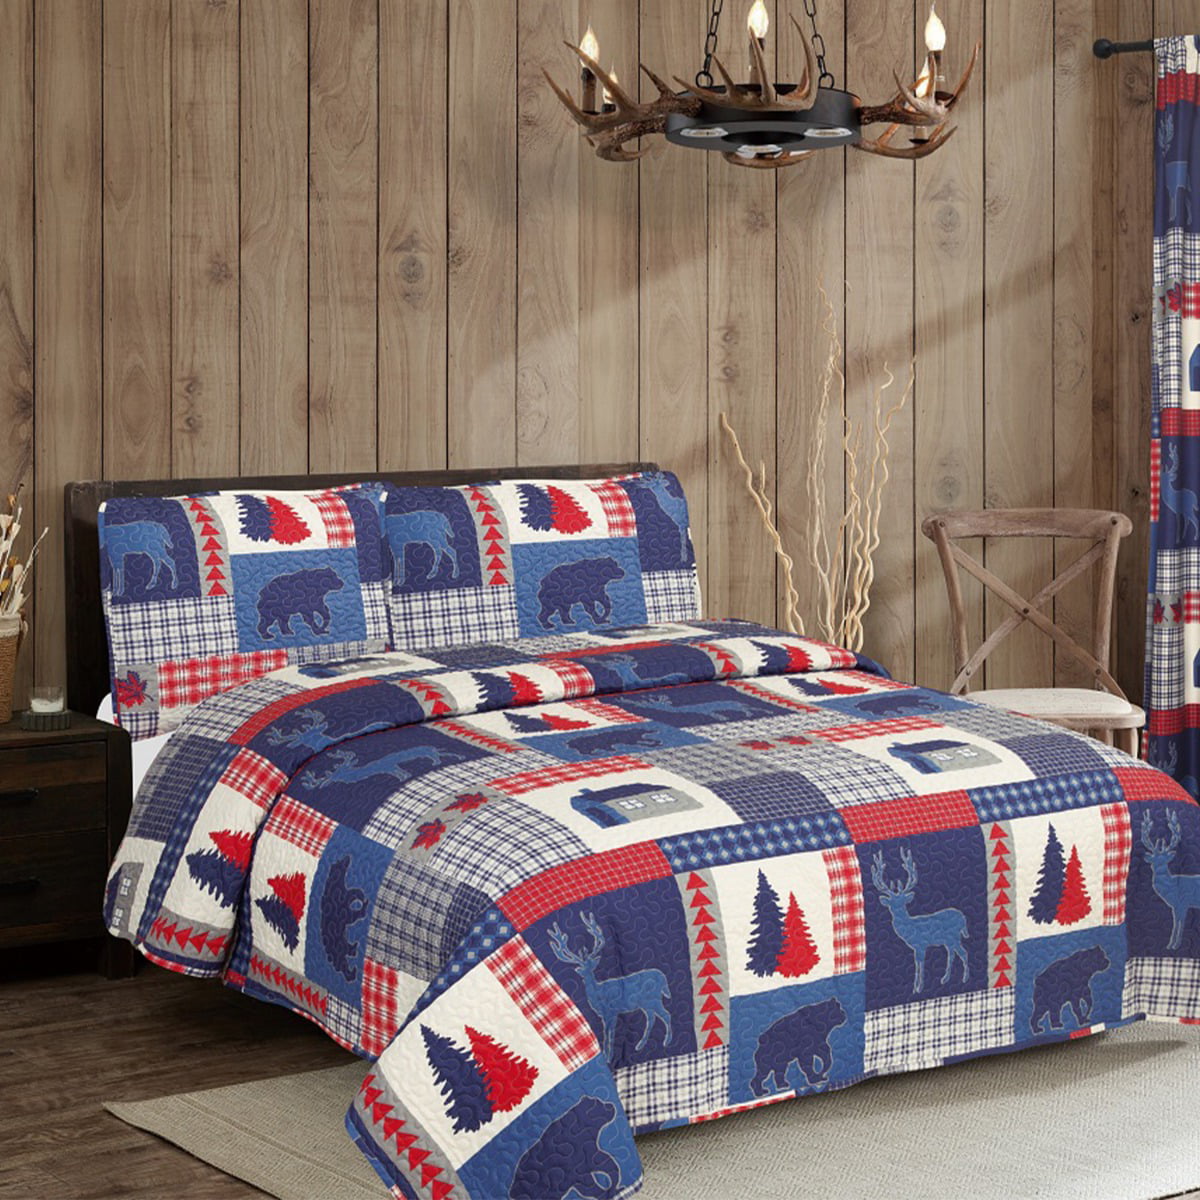 PRIMITIVE COUNTRY CABIN LODGE CAROLINA BLUE STAR Full Queen QUILT SET 